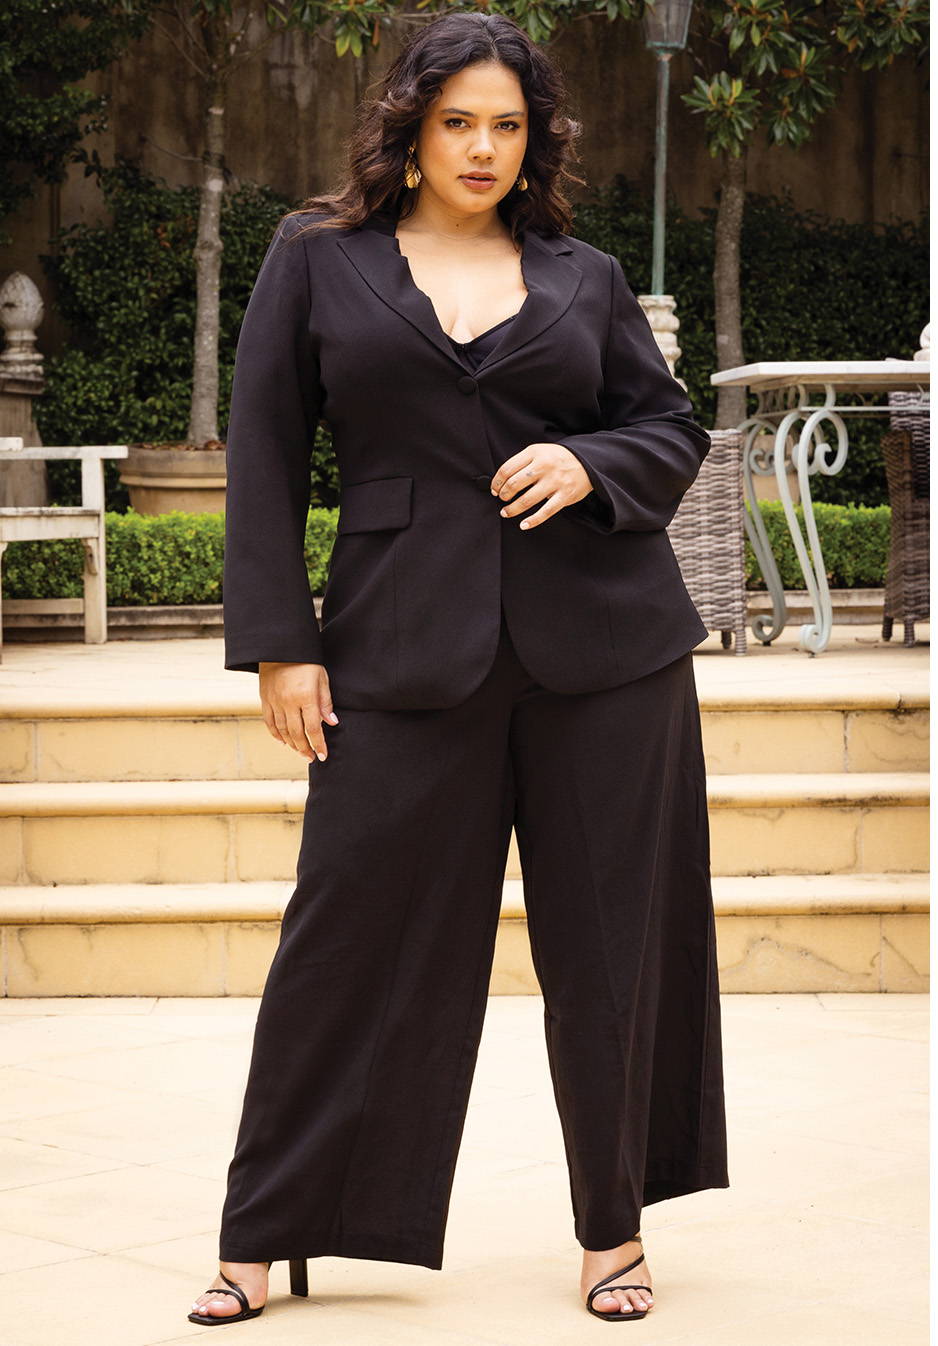 Shop Dresses, Tops, Skirts, Pants, Jeans at You and All Curvy Plus Size 